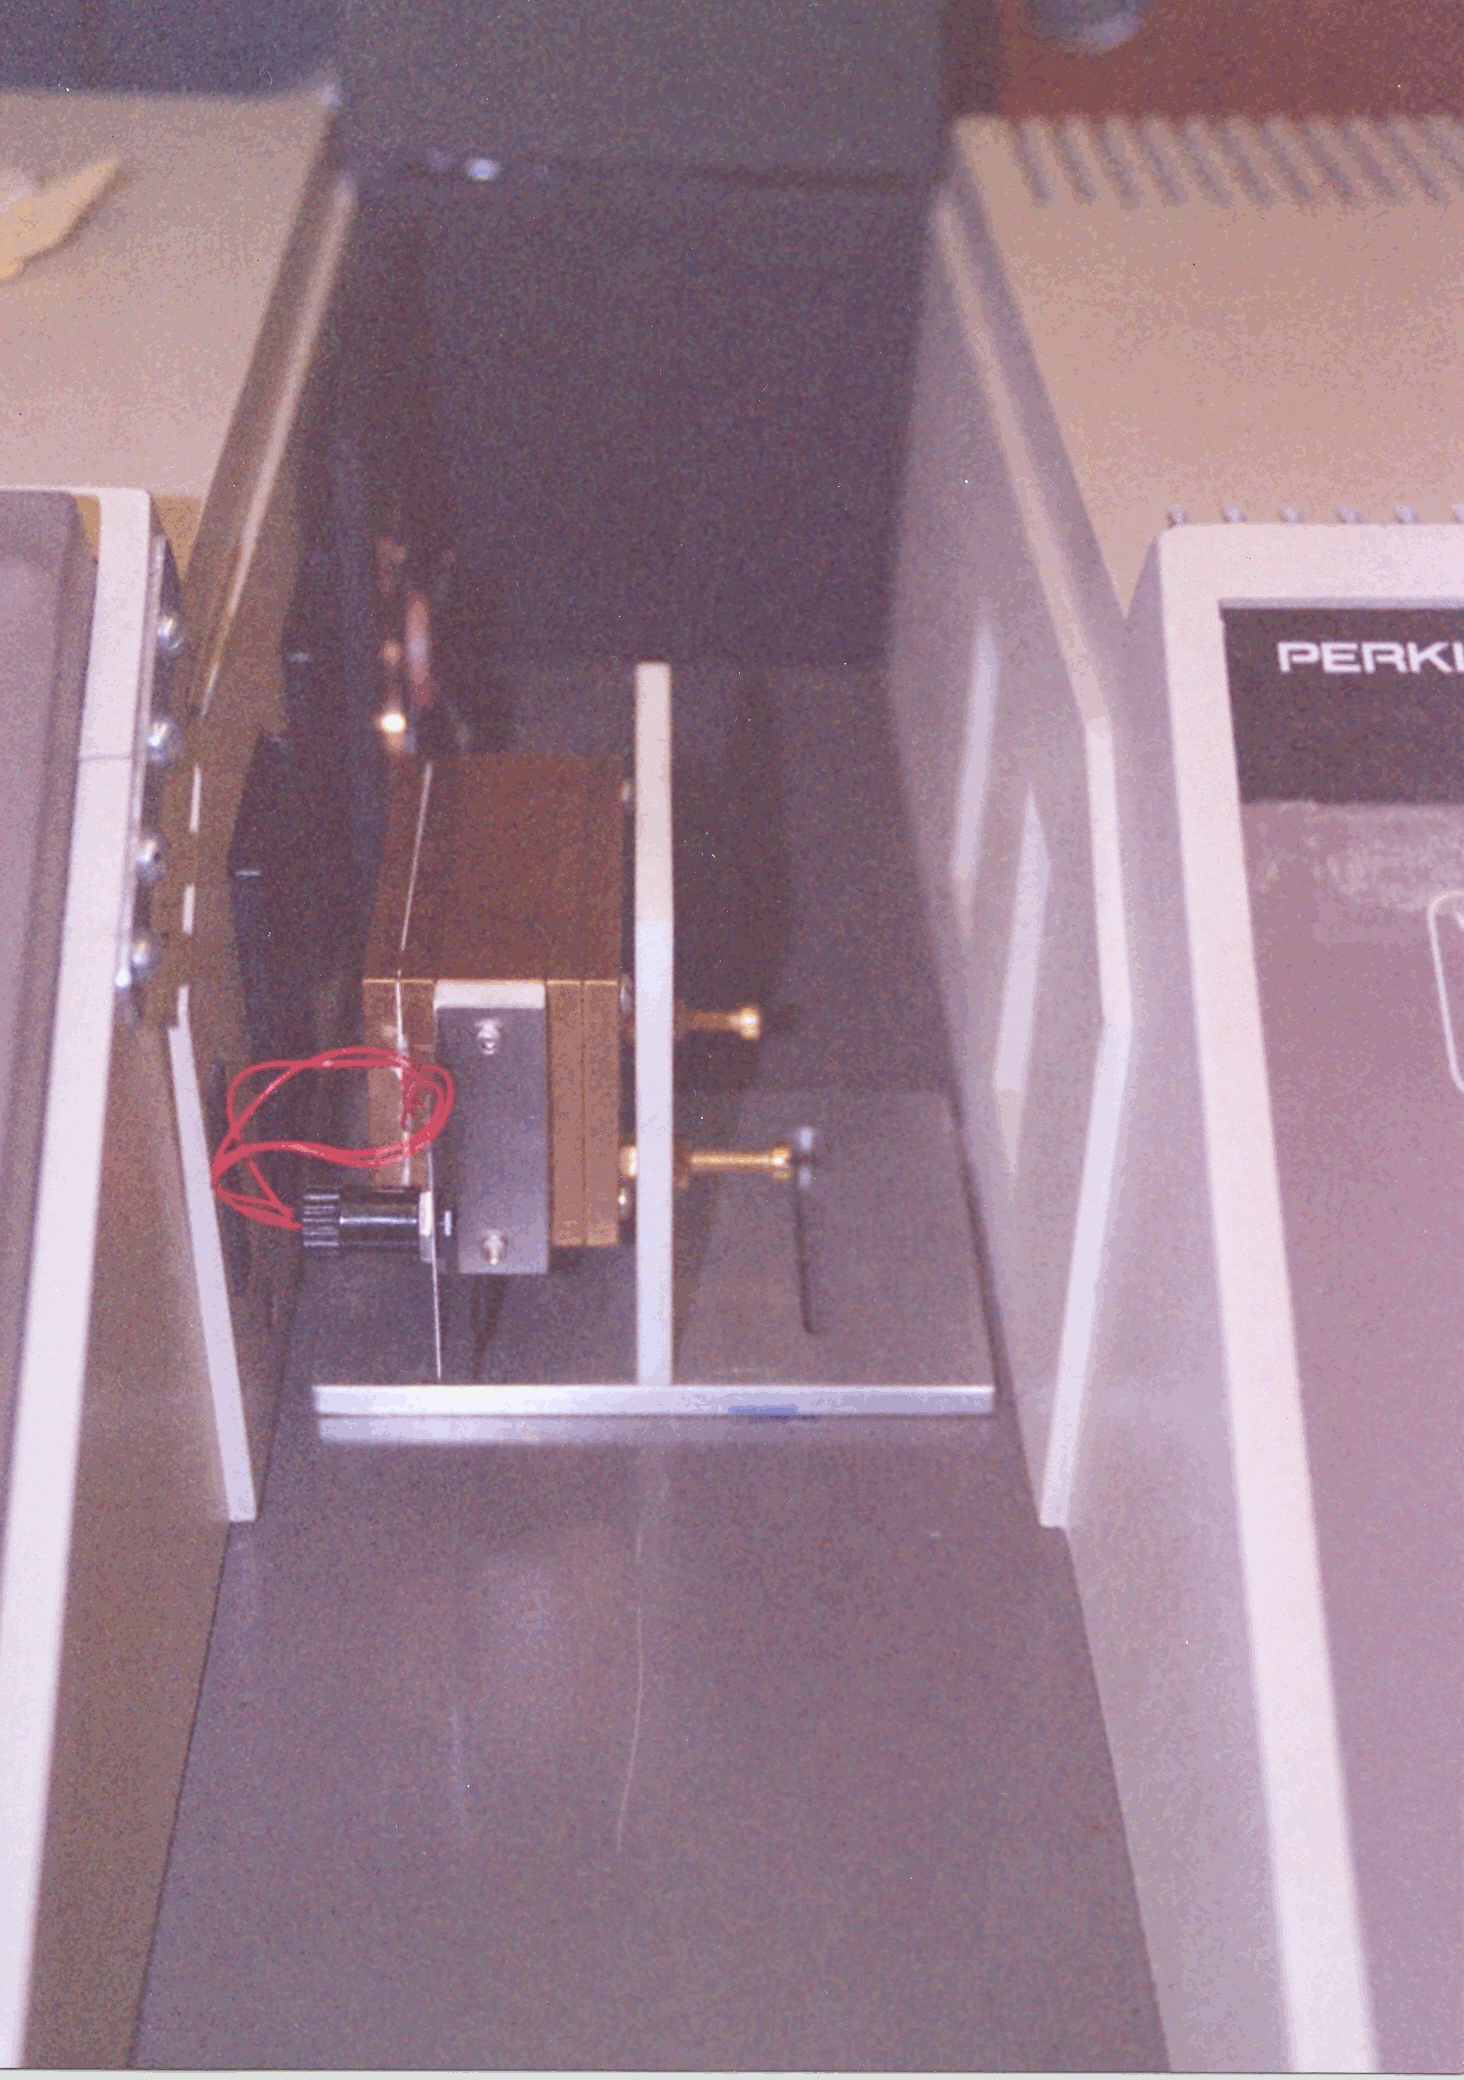 the oven placed in the spectrometer